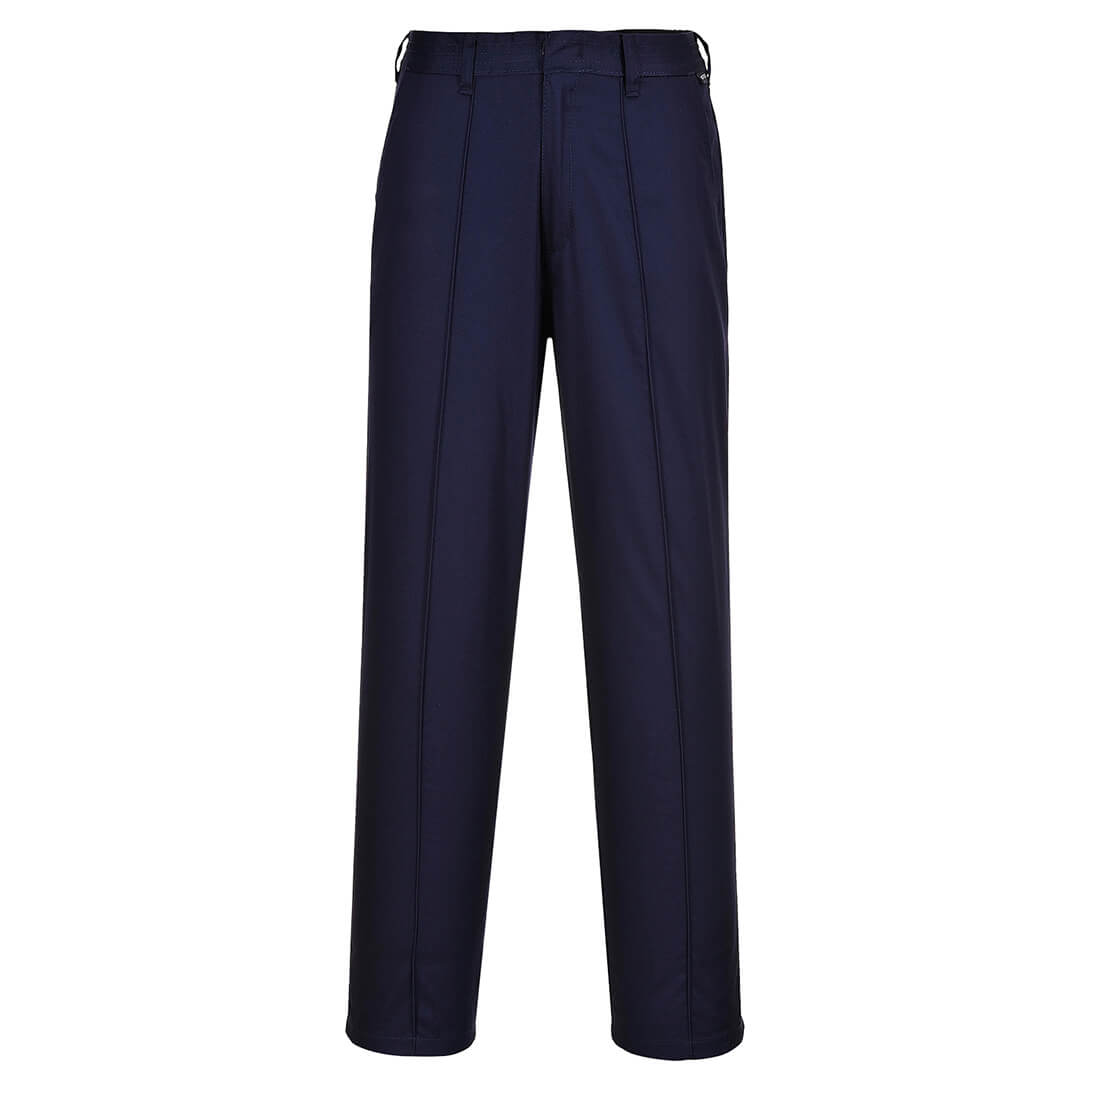 Image of Portwest LW97 ladies Elasticated Trousers Navy Blue 3XL 31"